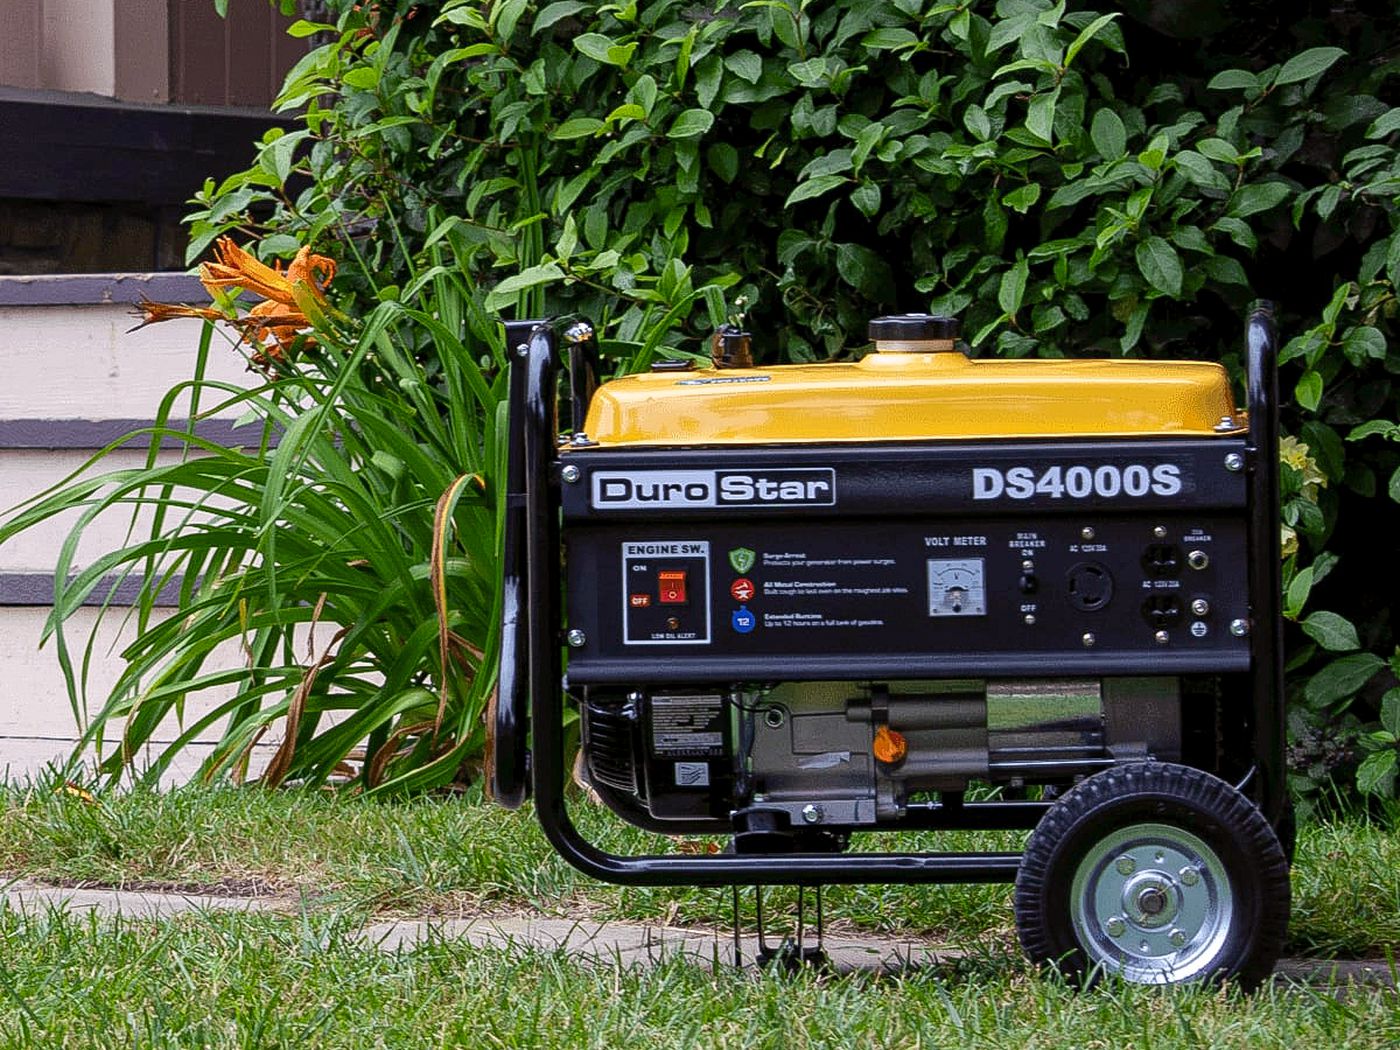 Getting The Right Generator For Your Home